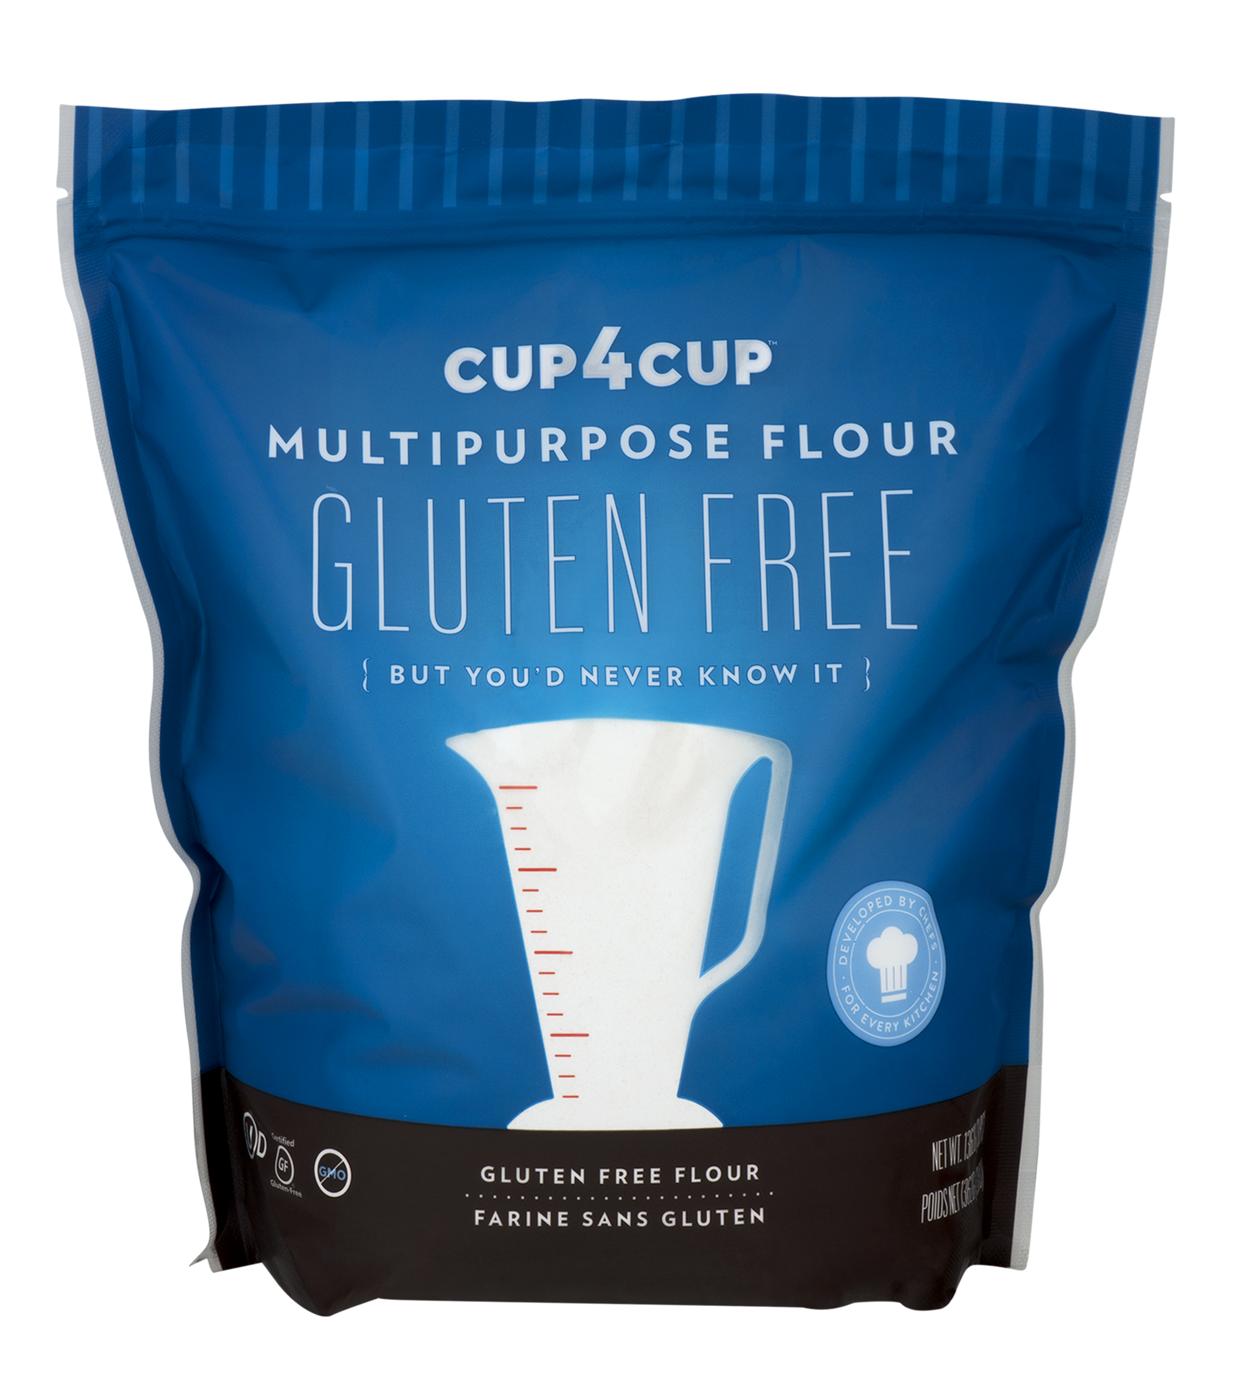 Cup 4 Cup Gluten Free Flour; image 1 of 2